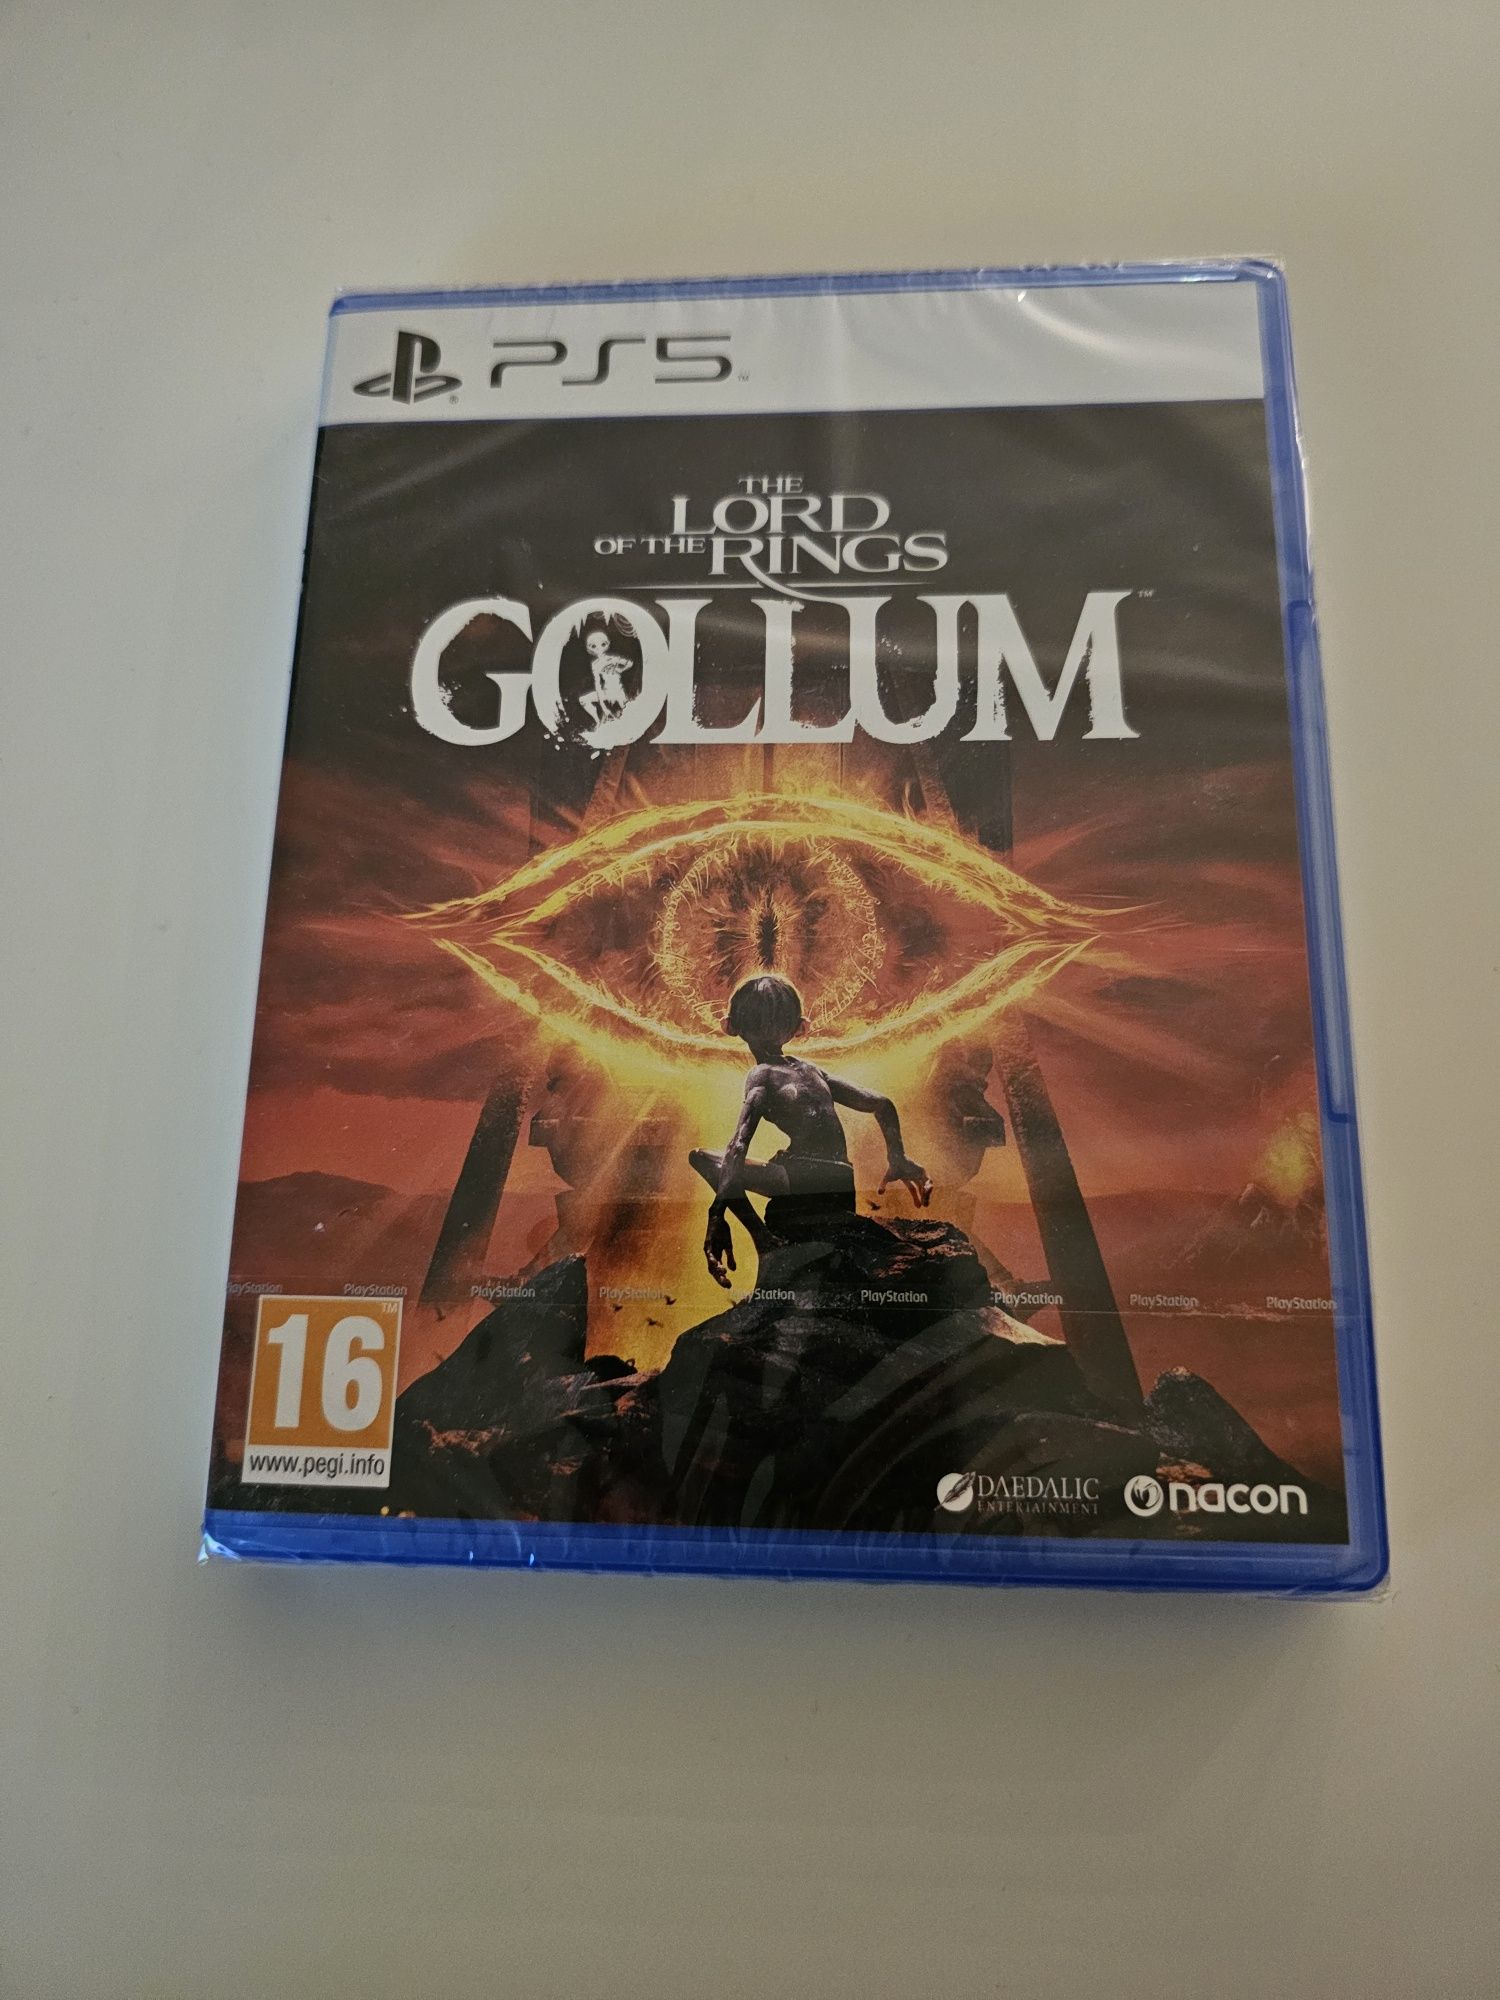 Lord of the rings Gollum PS5